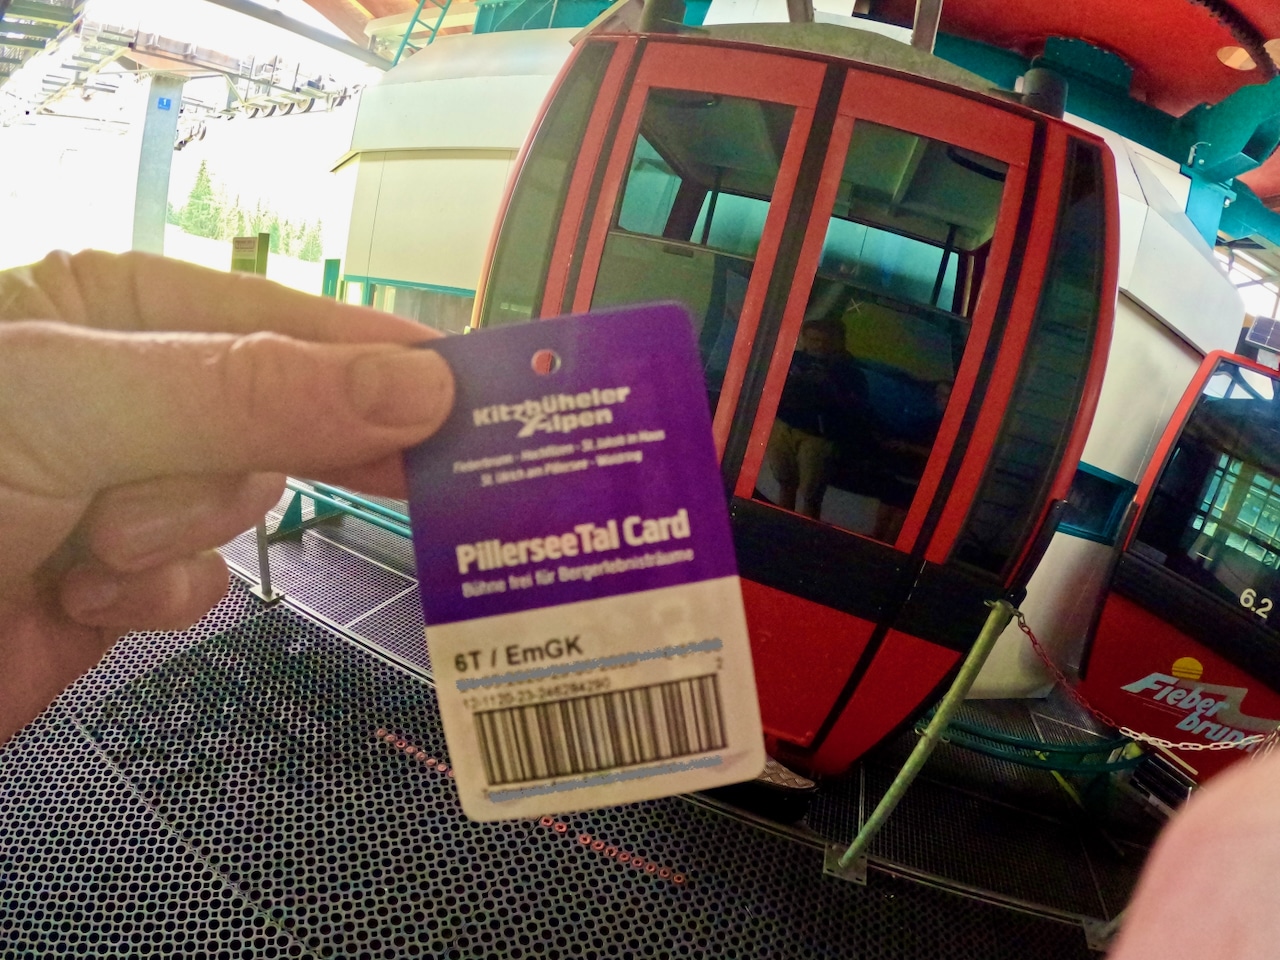 The PillerseeTal Card gives you free entry to the Fieberbrunn, St. Jakob in Haus and Waidring mountain railways. Bergbahnen Fieberbrunn Bergbahnen Fieberbrunn & PillerseeTal – my experience report